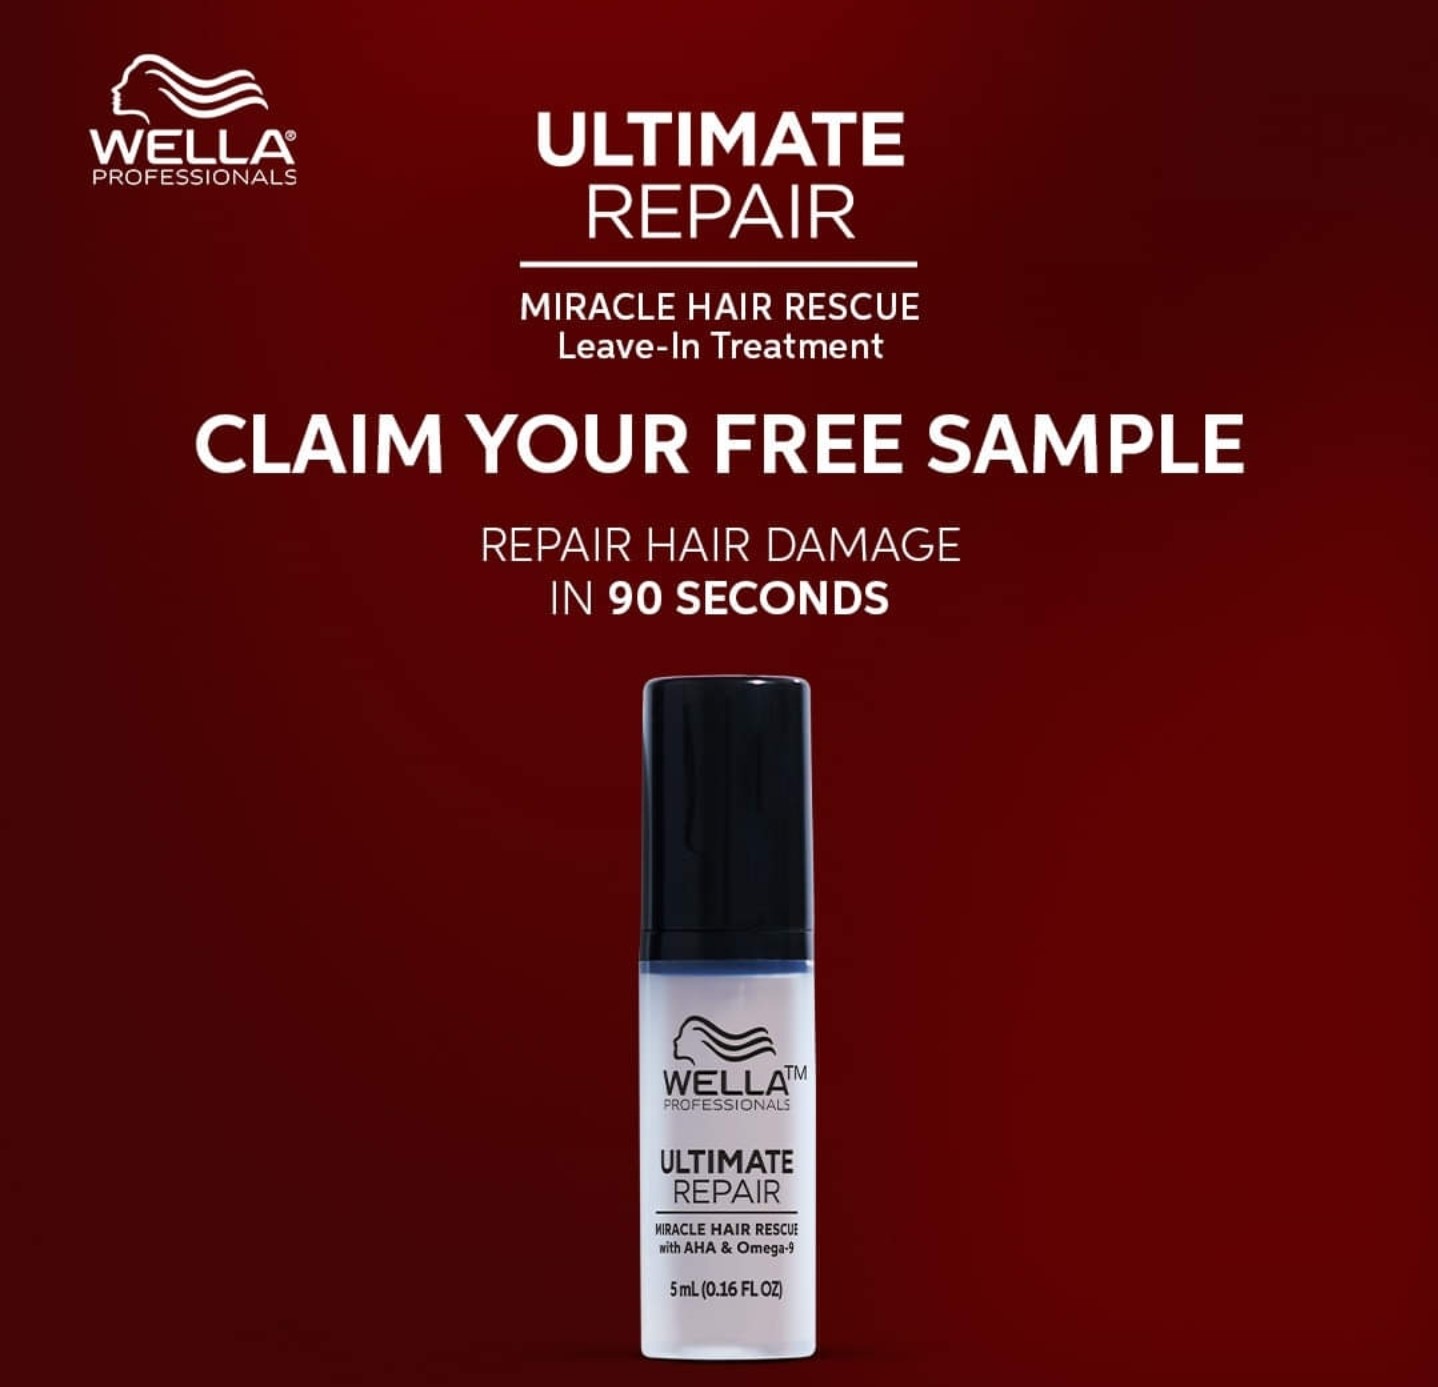 Free Sample of Wella Miracle Hair Rescue Leave-In Treatment